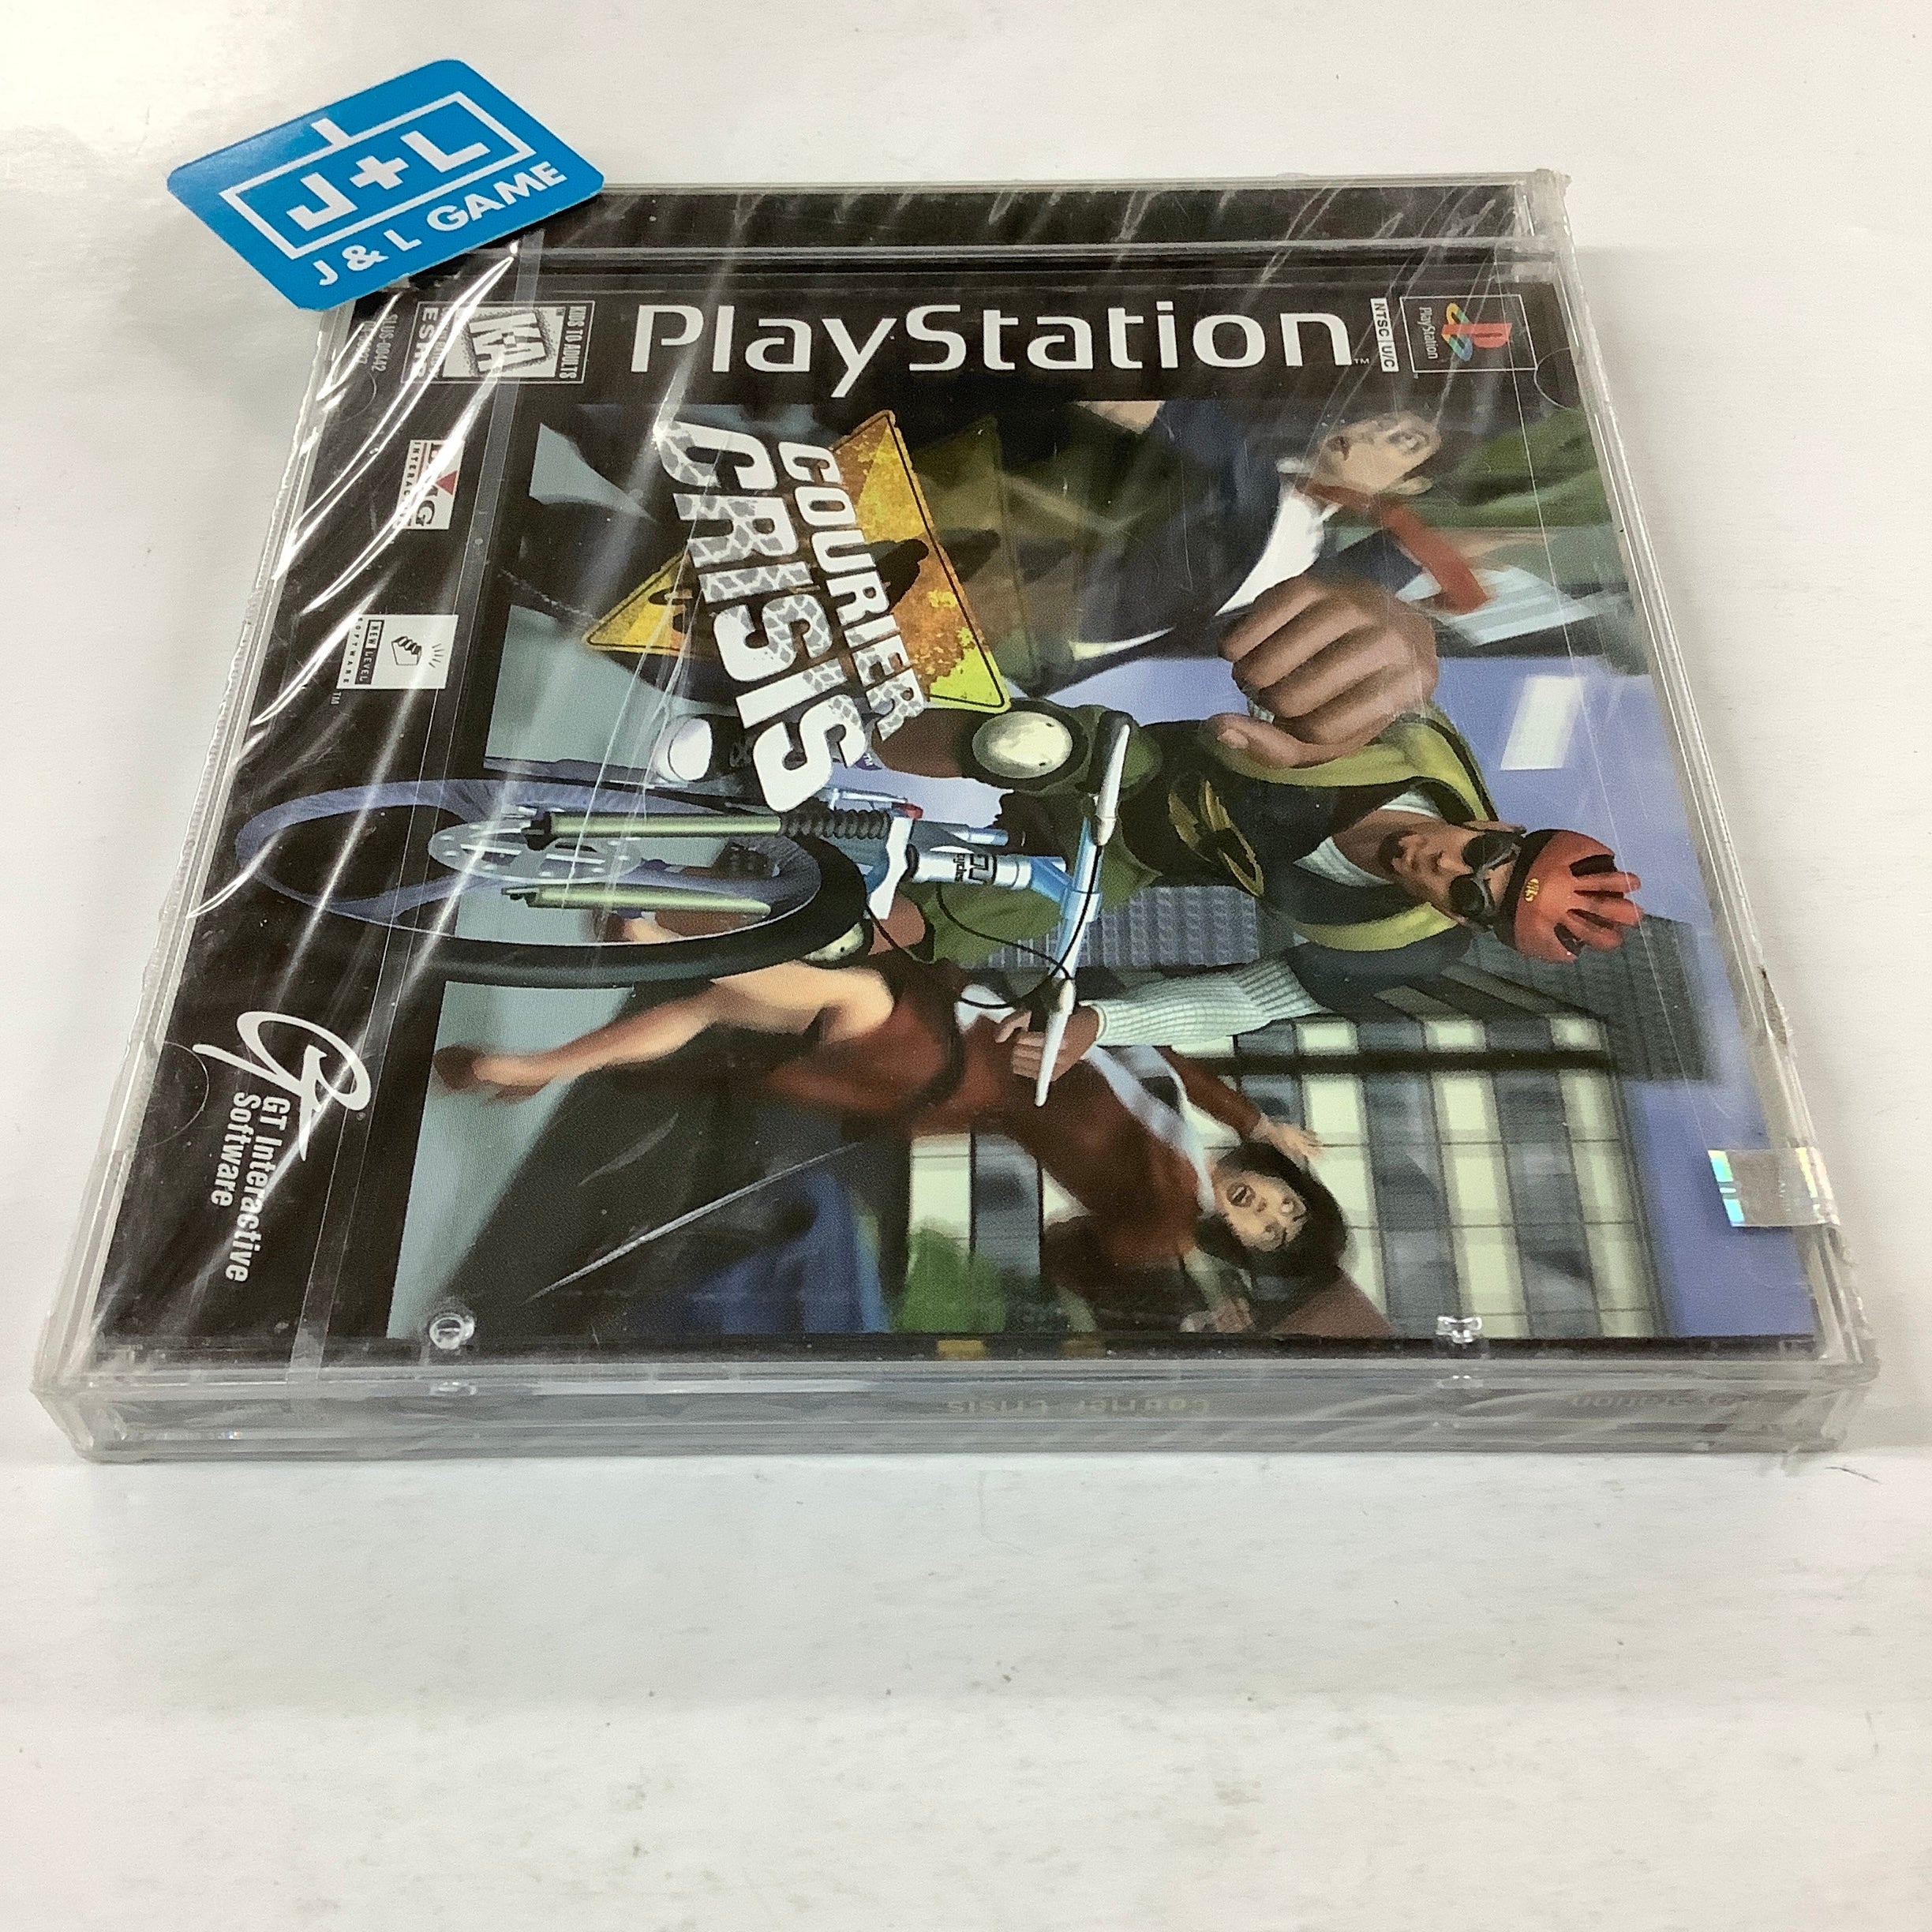 Courier Crisis - (PS1) PlayStation 1 Video Games GT Interactive   